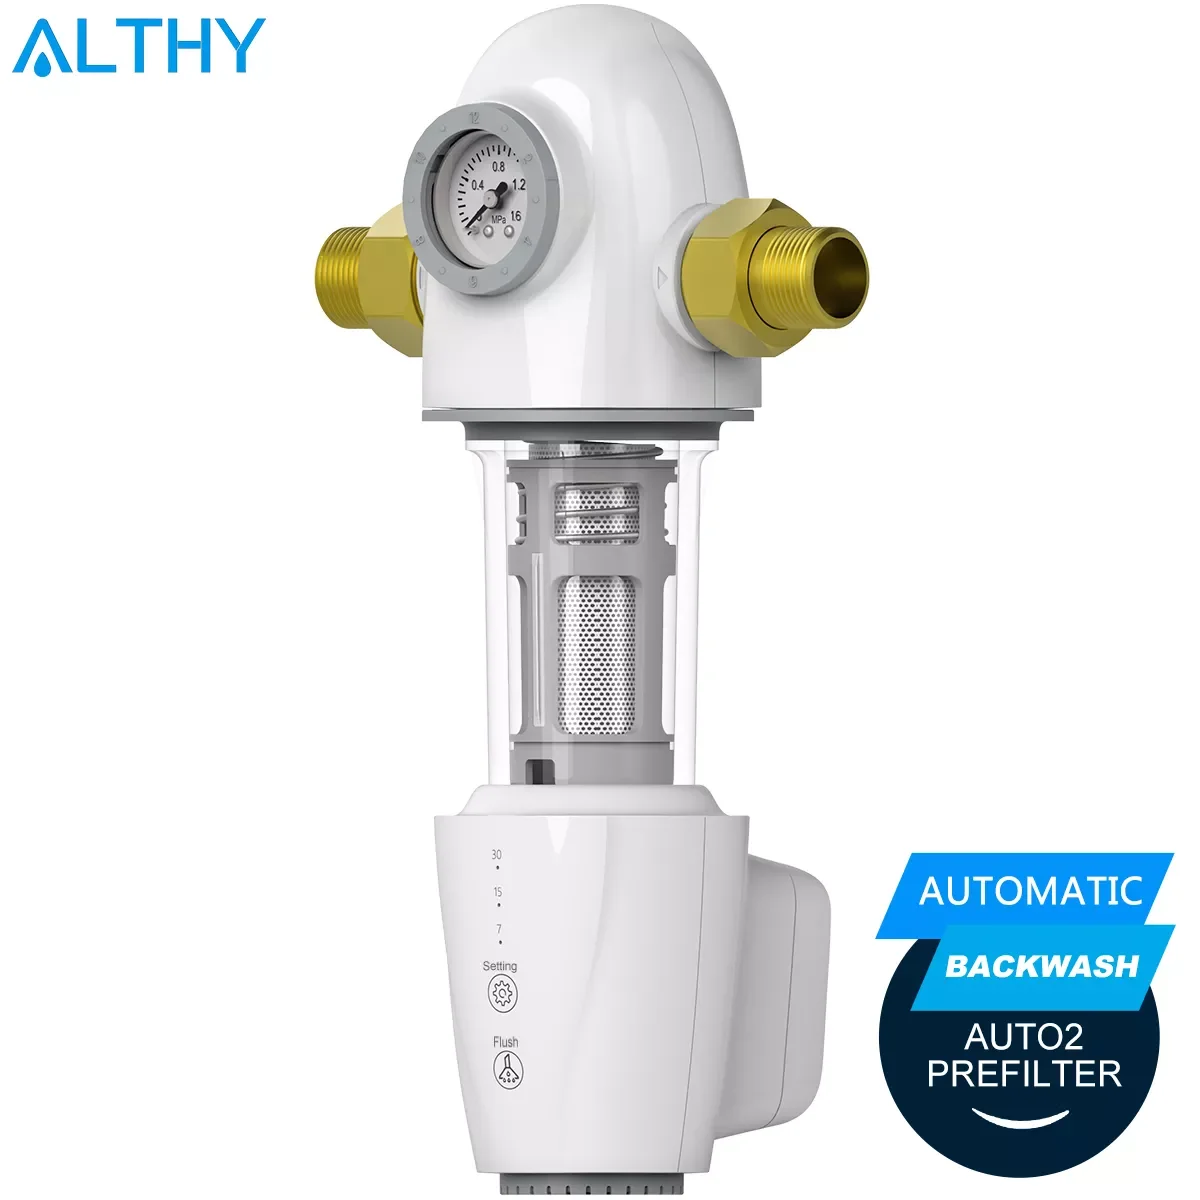 2022 ALTHY PRE-AUTO2 Automatic Flushing Backwash Prefilter Spin Down Sediment Water Filter Central Whole House Purifier System